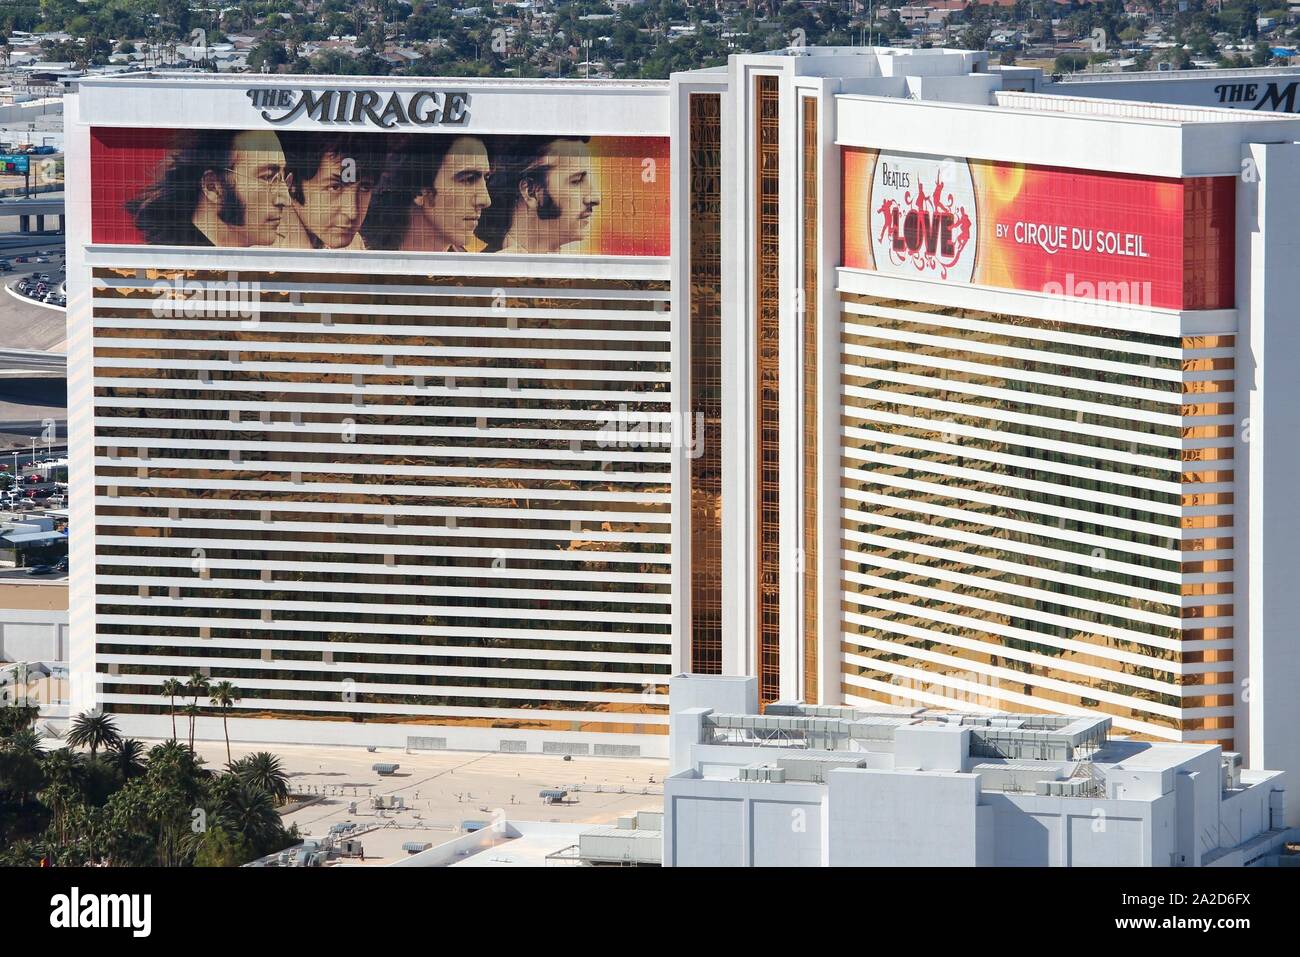 LAS VEGAS, USA - APRIL 14, 2014: Aerial view of The Mirage casino in Las Vegas. Among 25 largest hotels in the world, 15 are located on Las Vegas Stri Stock Photo